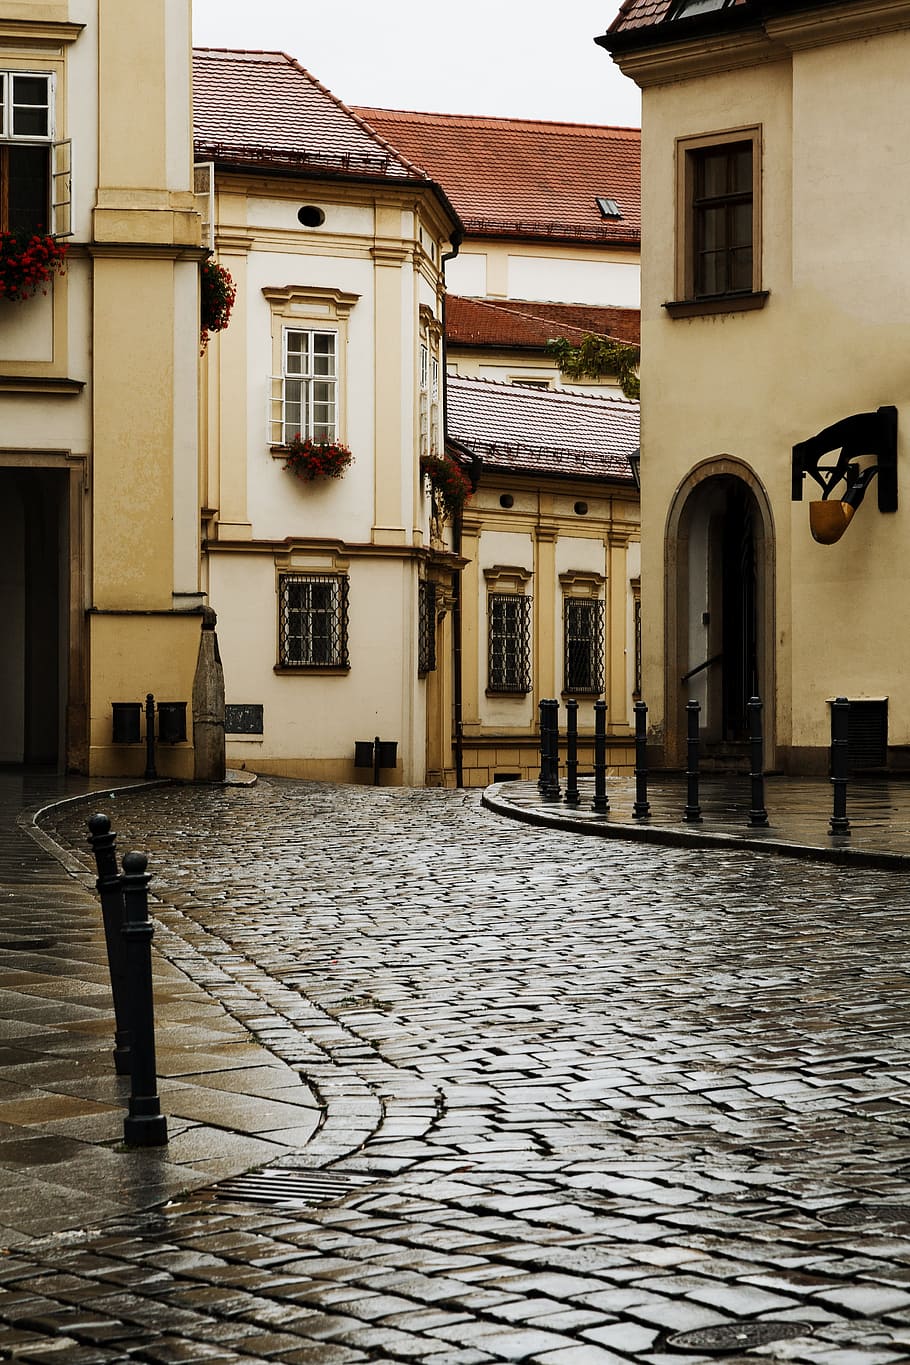 wet, curved, road, concrete, buildings, brown, white, house, ancient, architecture